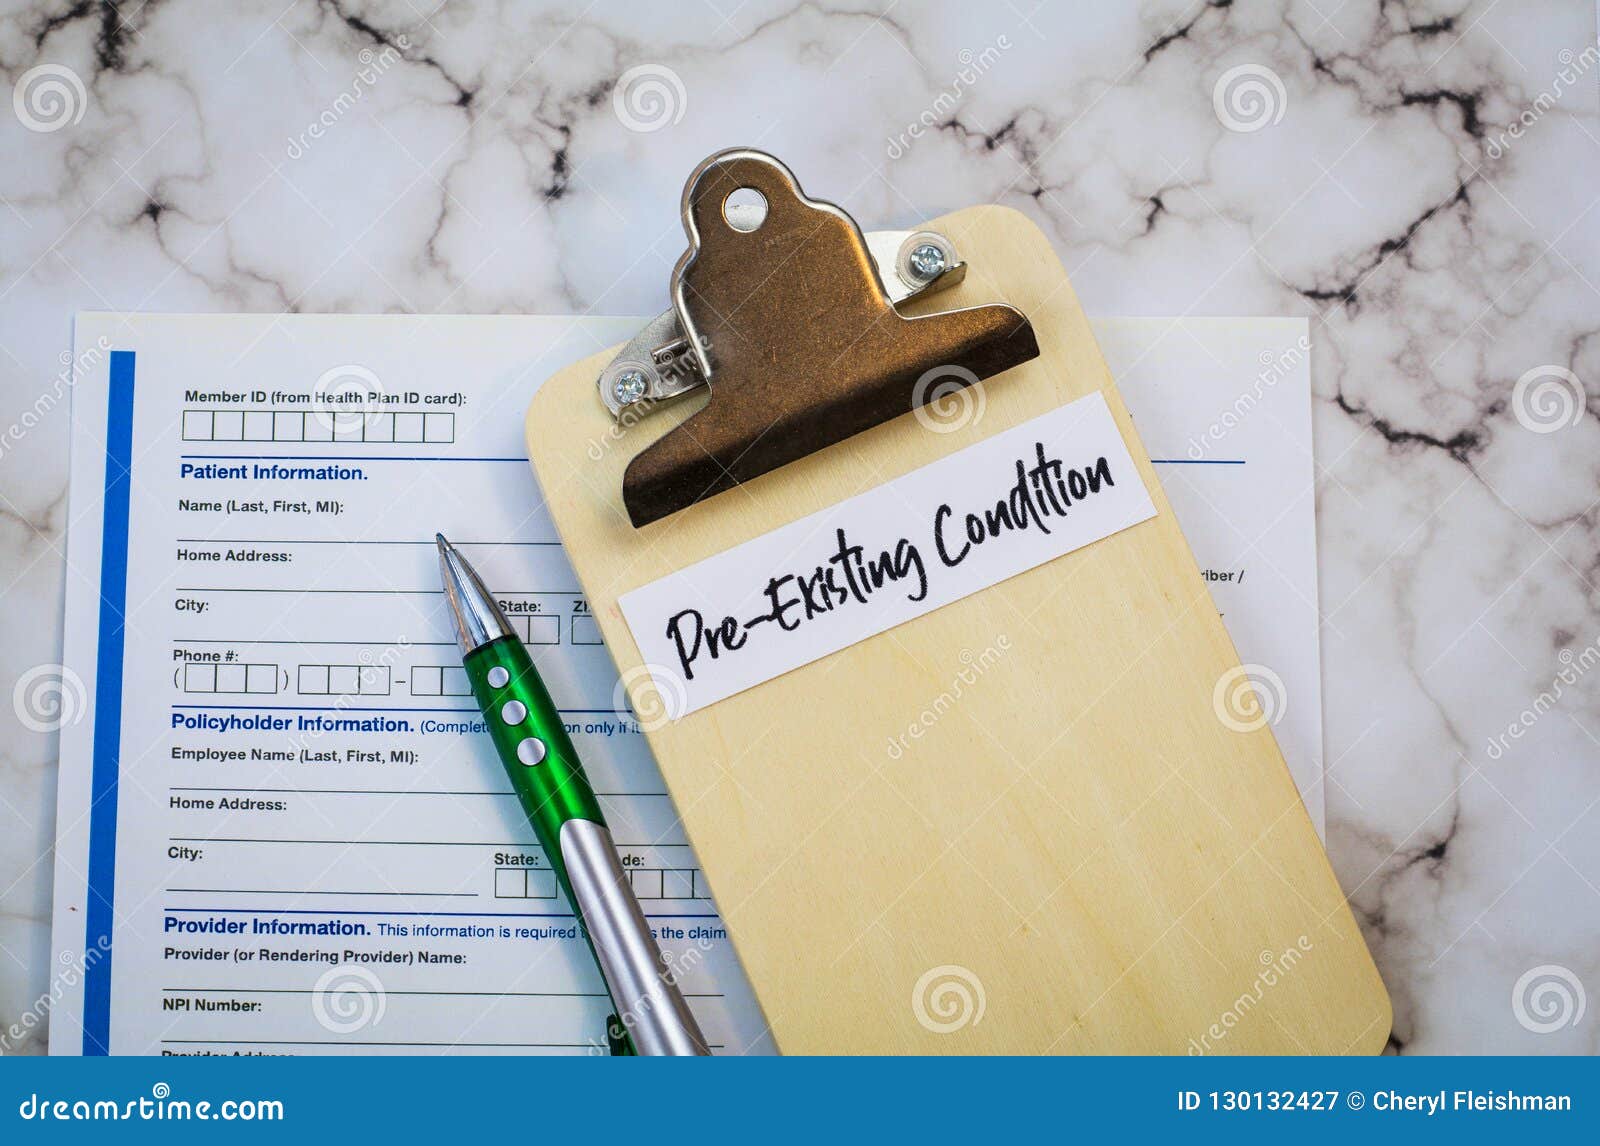 pre-existing condition healthcare concept with clipboard and form